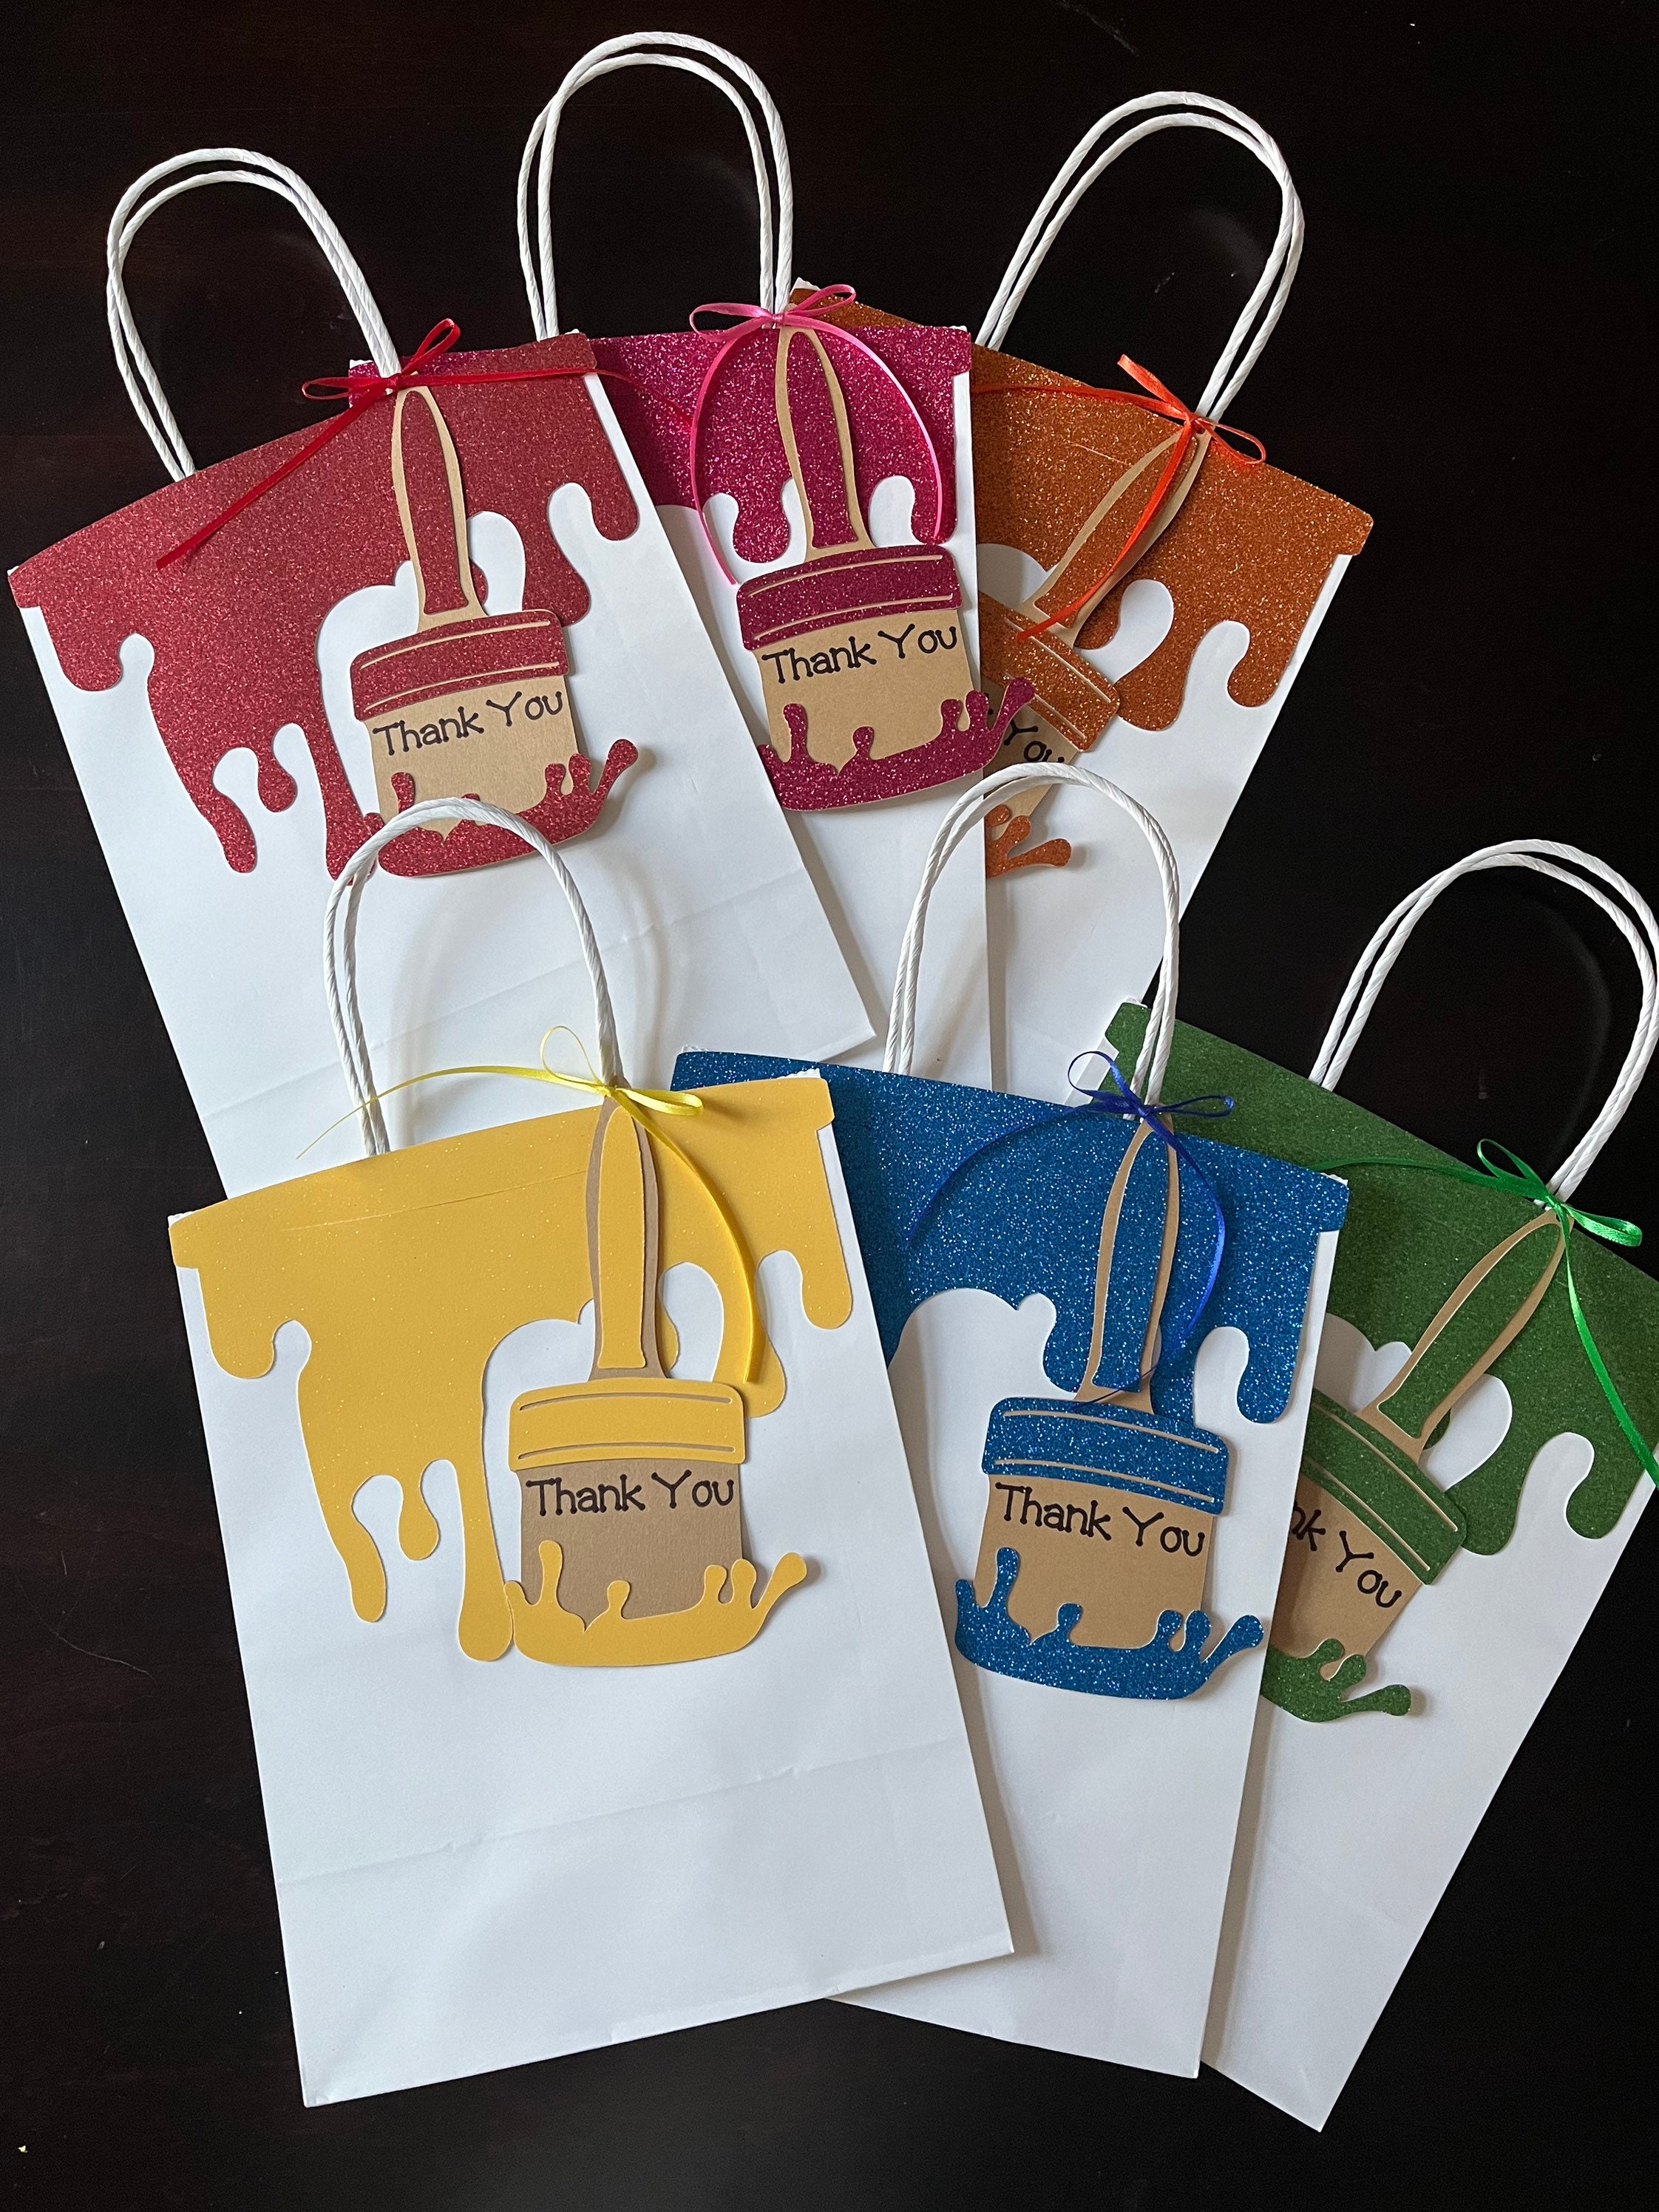 12 Pieces Coloring Goodie Bags Reusable Party Favor Bags Graffiti Goodie  Bags Color Your Own Art Goodie Bags for Birthday Party